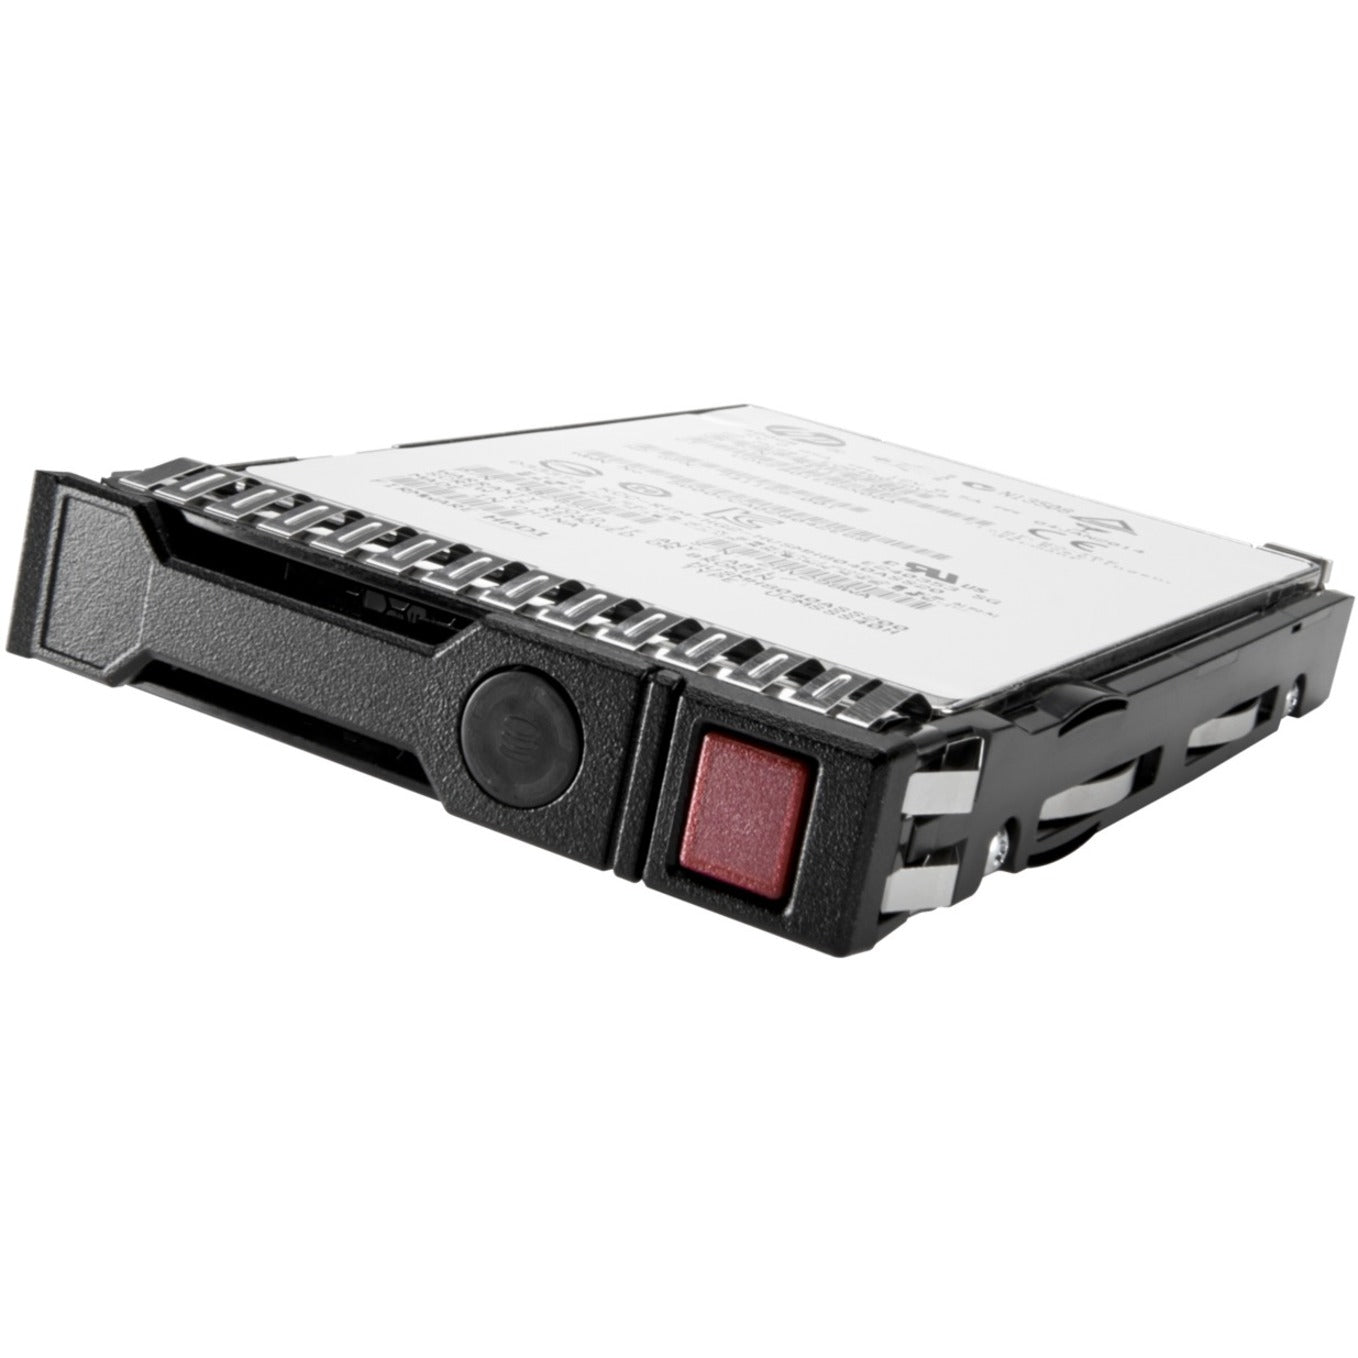 HPE P18426-B21 1.92TB SATA 6G Read Intensive SFF (2.5in) SC 3yr Wty Multi Vendor SSD, High Performance and Reliability